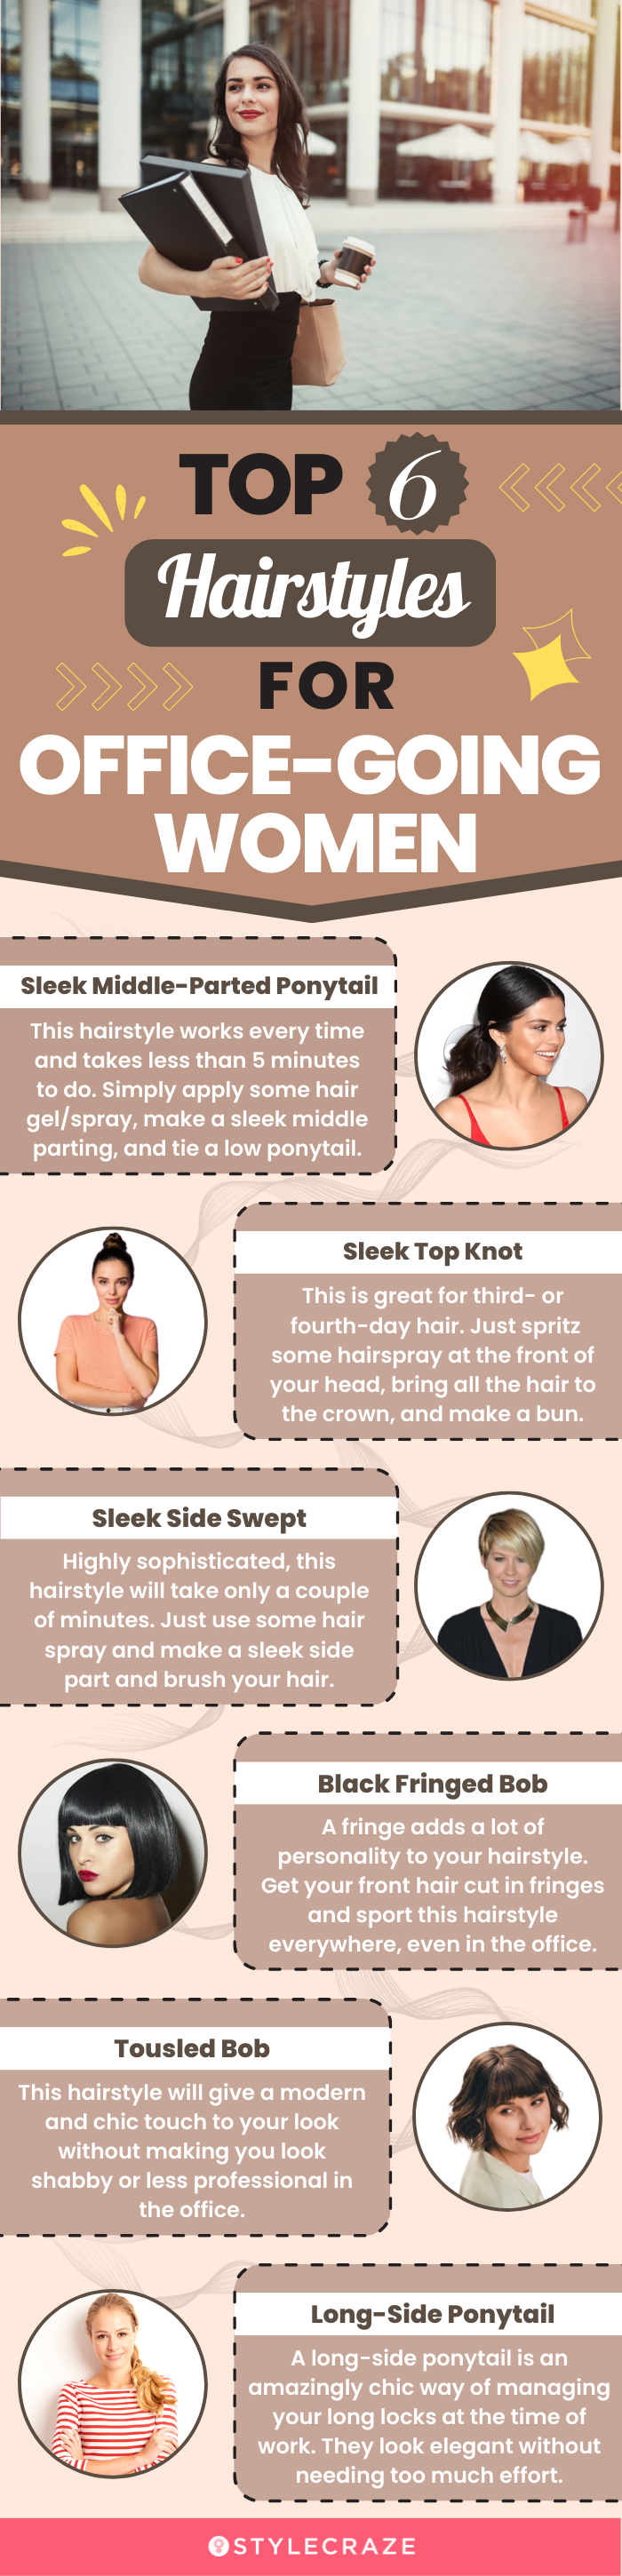 top 6 hairstyles for office going women (infographic)